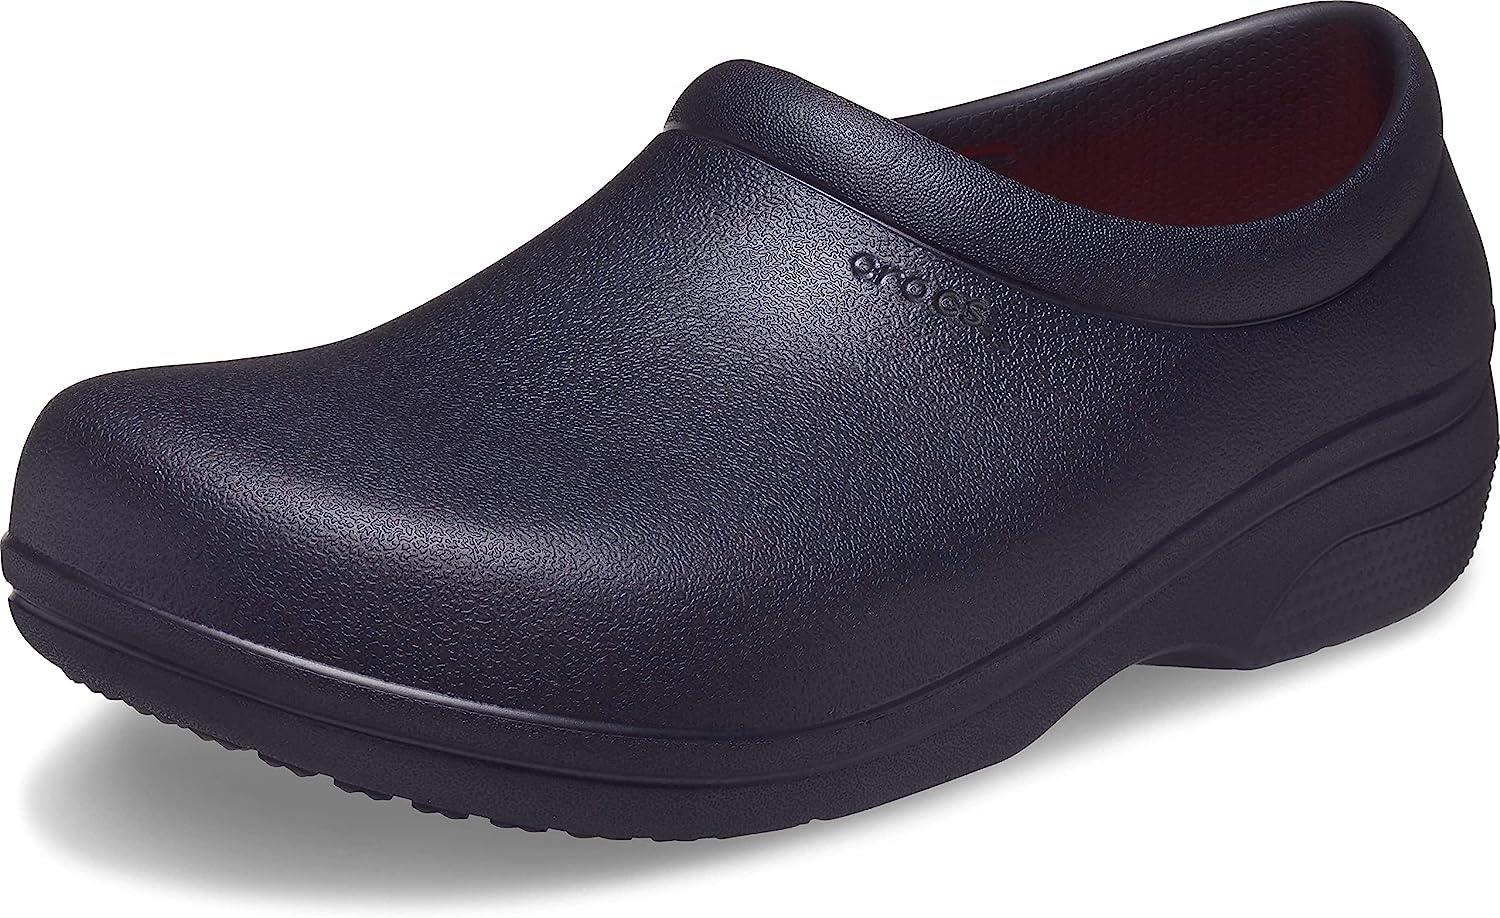 price on crocs shoes product review